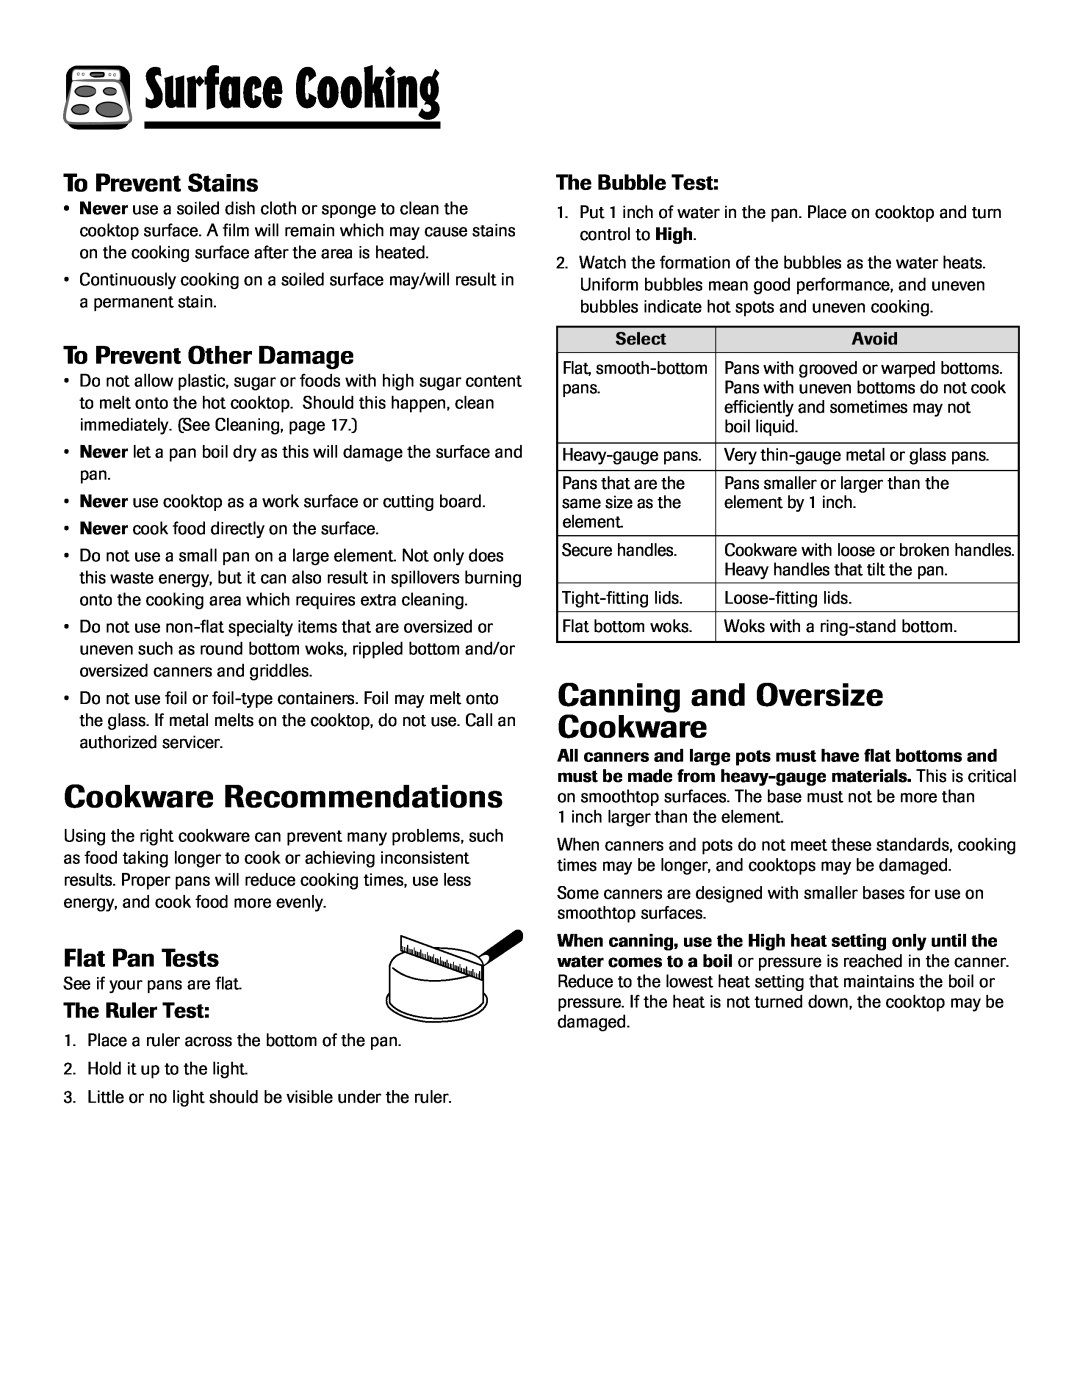 Maytag 8113P768-60 Cookware Recommendations, Canning and Oversize Cookware, To Prevent Stains, To Prevent Other Damage 